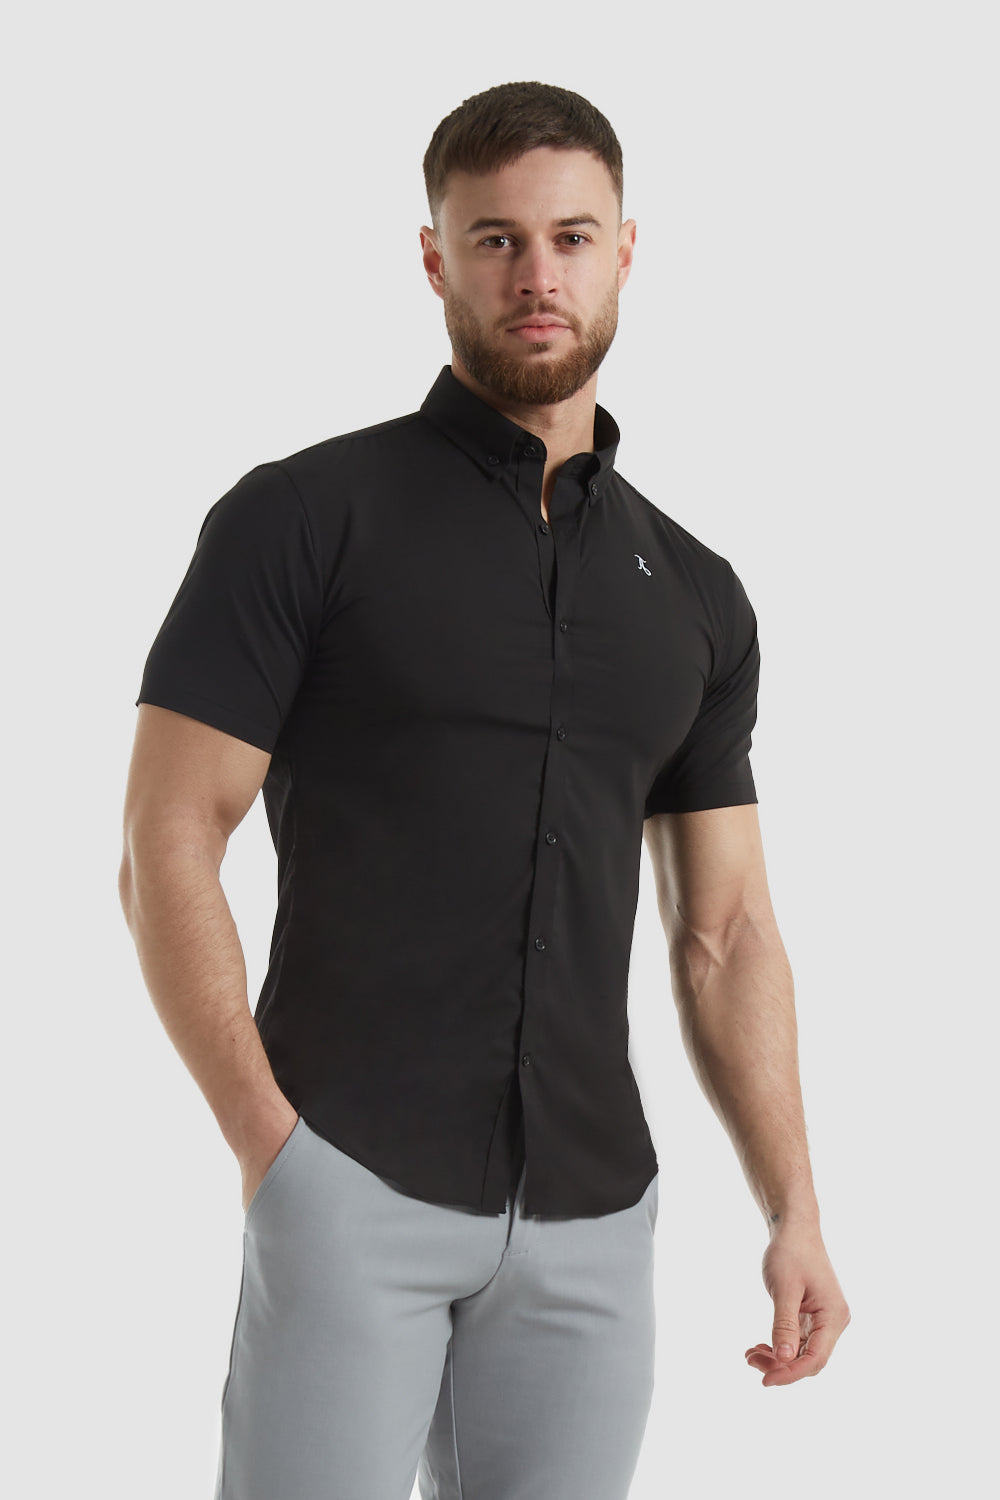 Muscle Fit Shirts - TAILORED ATHLETE